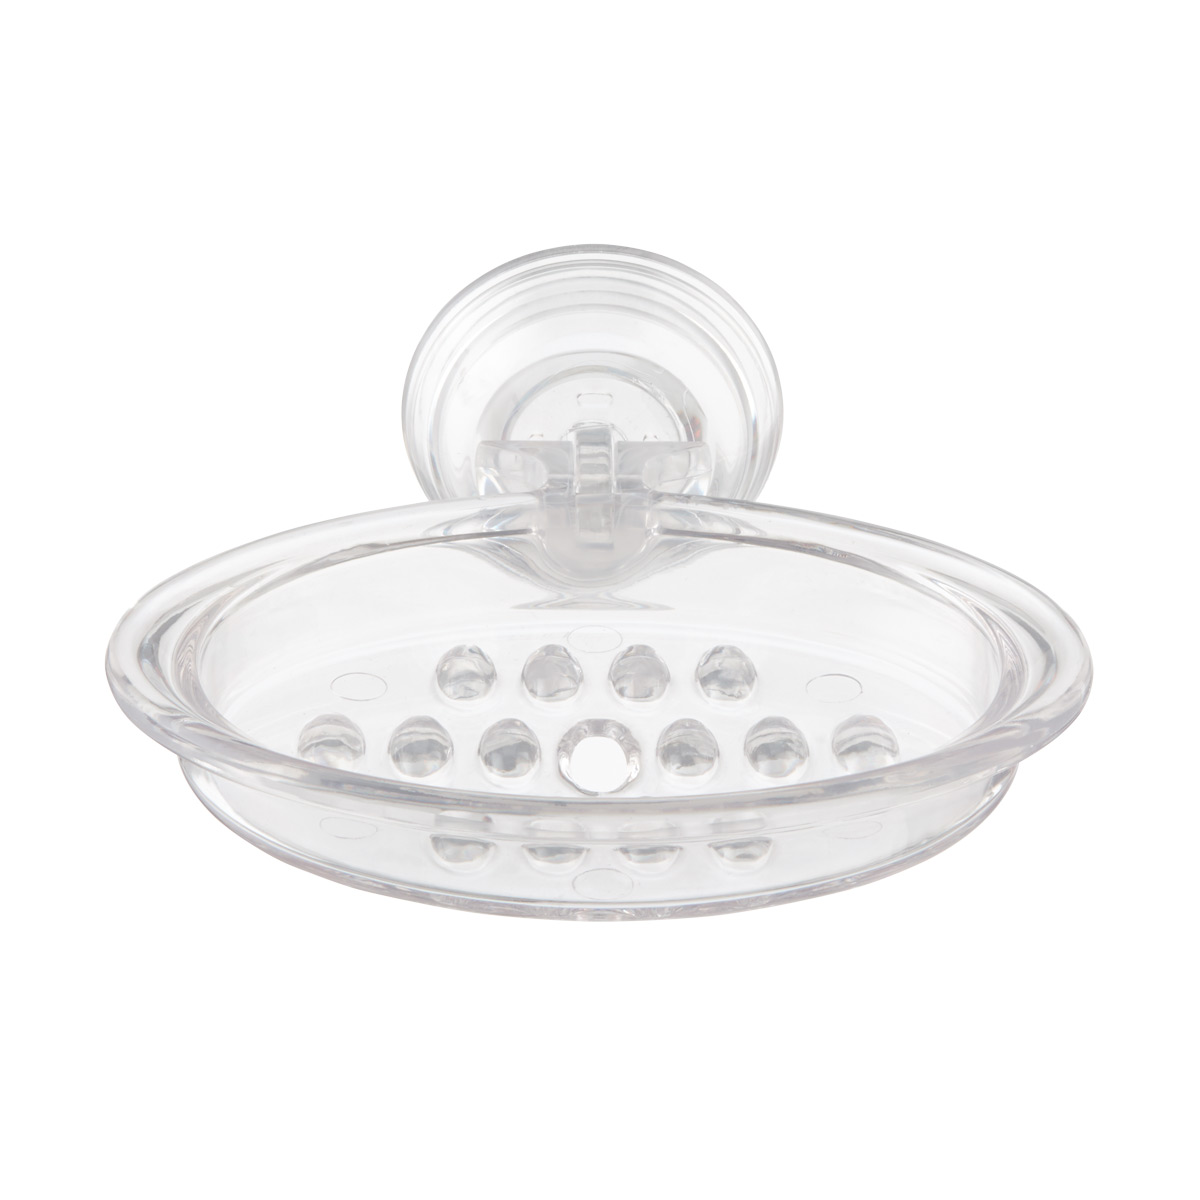 Power Lock Suction Soap Dish | The Container Store